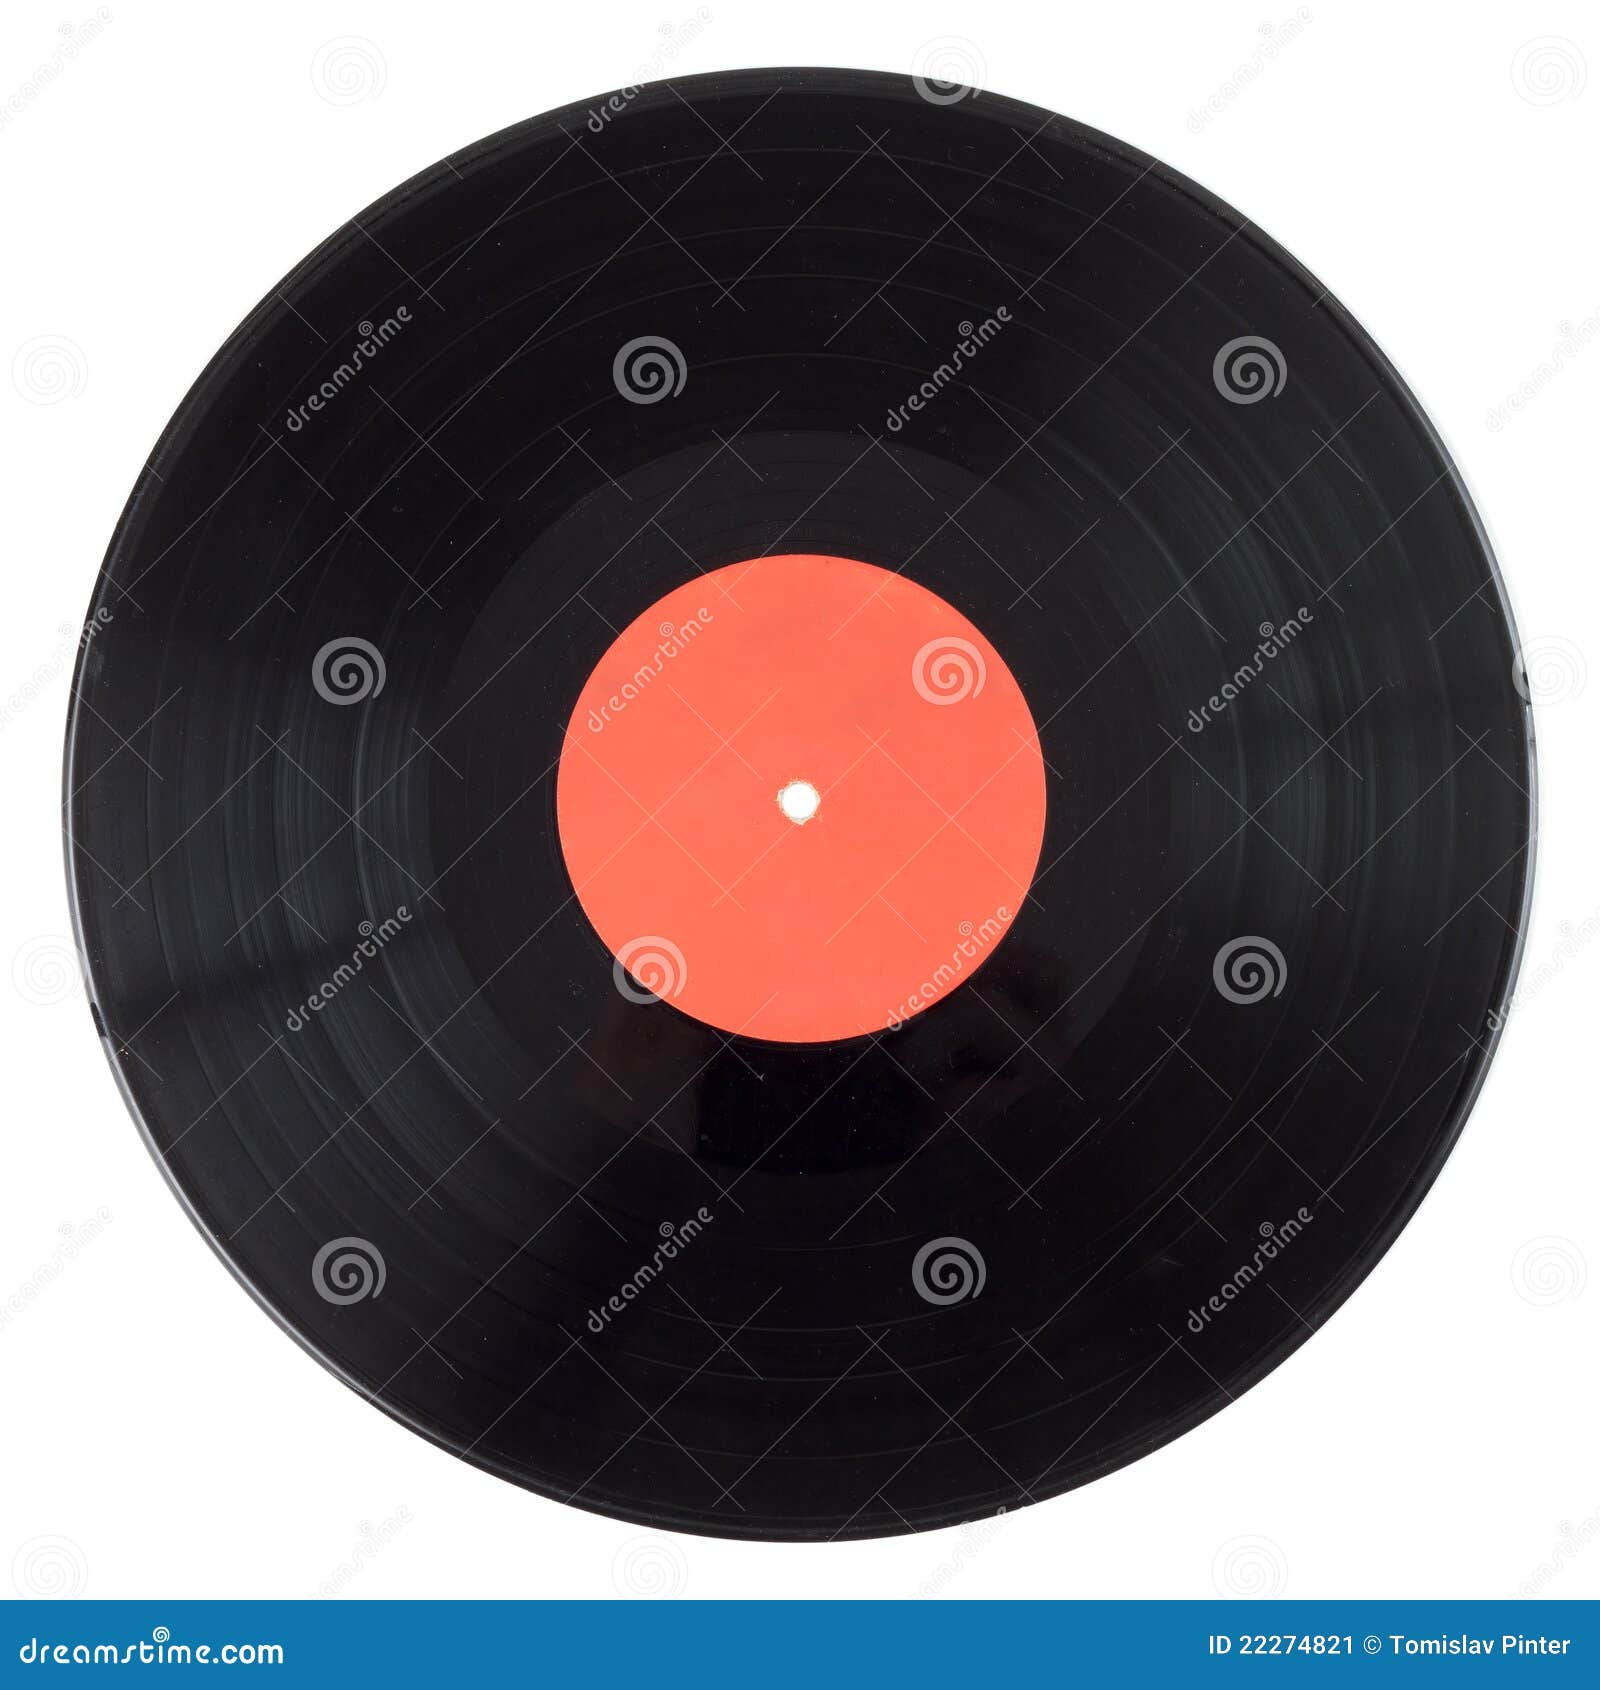 Old vinyl record stock image. Image of player, music - 22274821